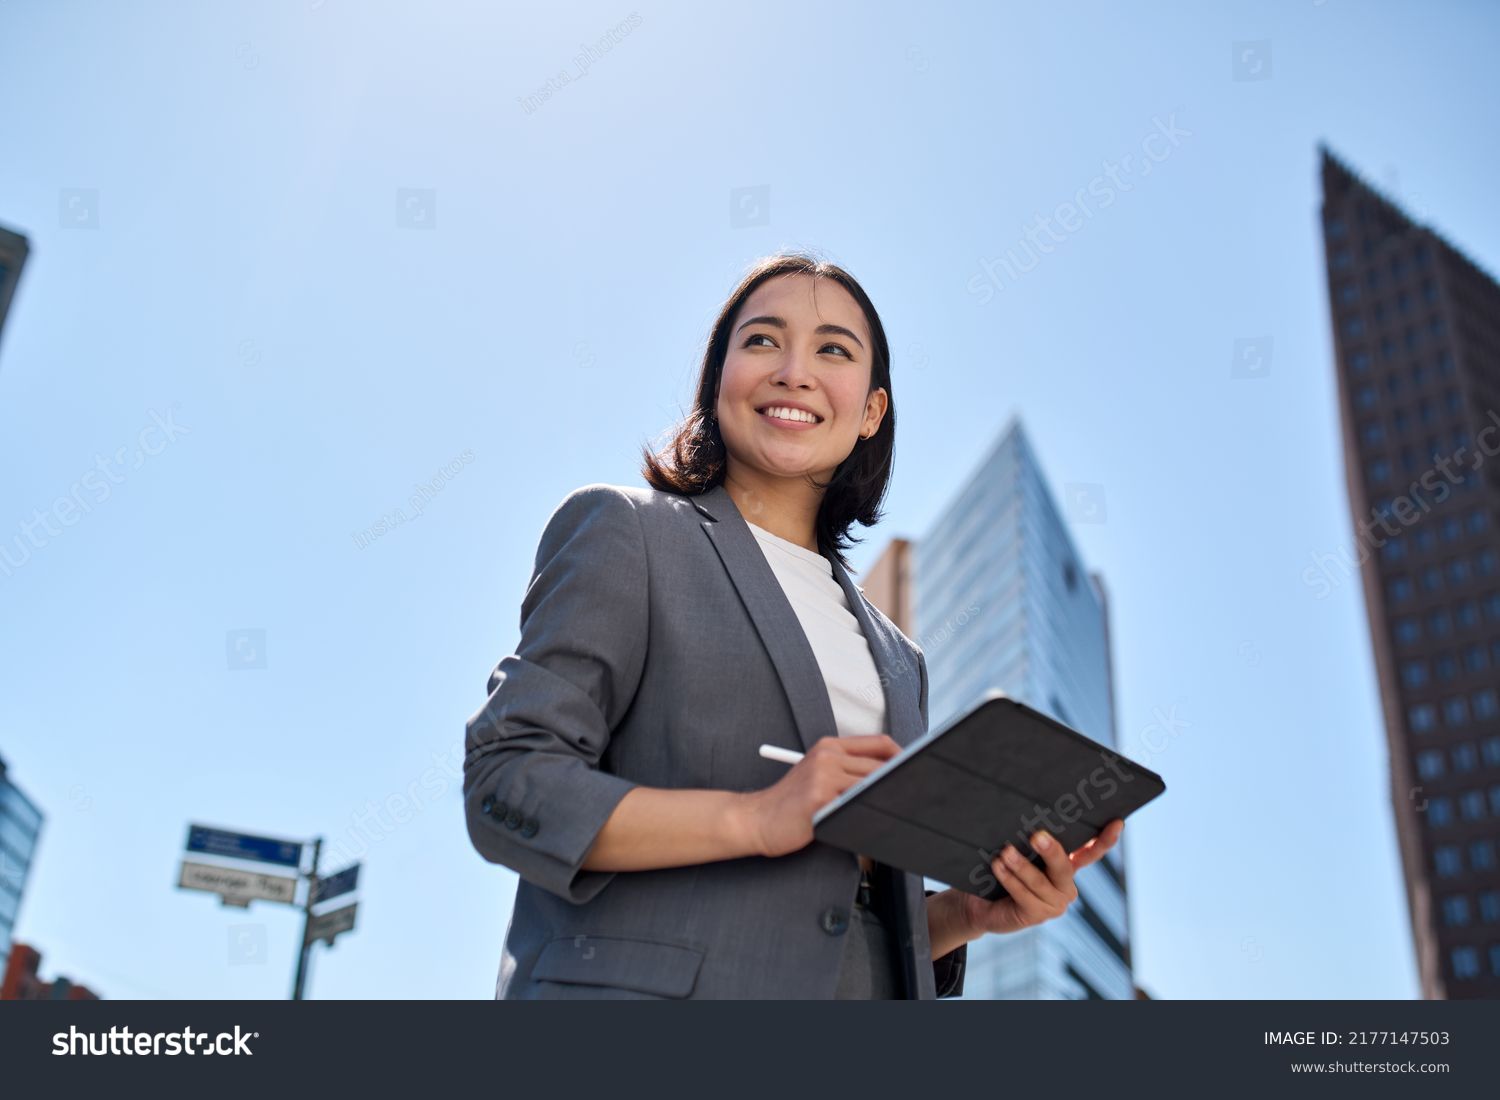 Smiling young Asian business woman leader entrepreneur, professional manager holding digital tablet computer using software applications standing on the street in big city on sky background. #2177147503